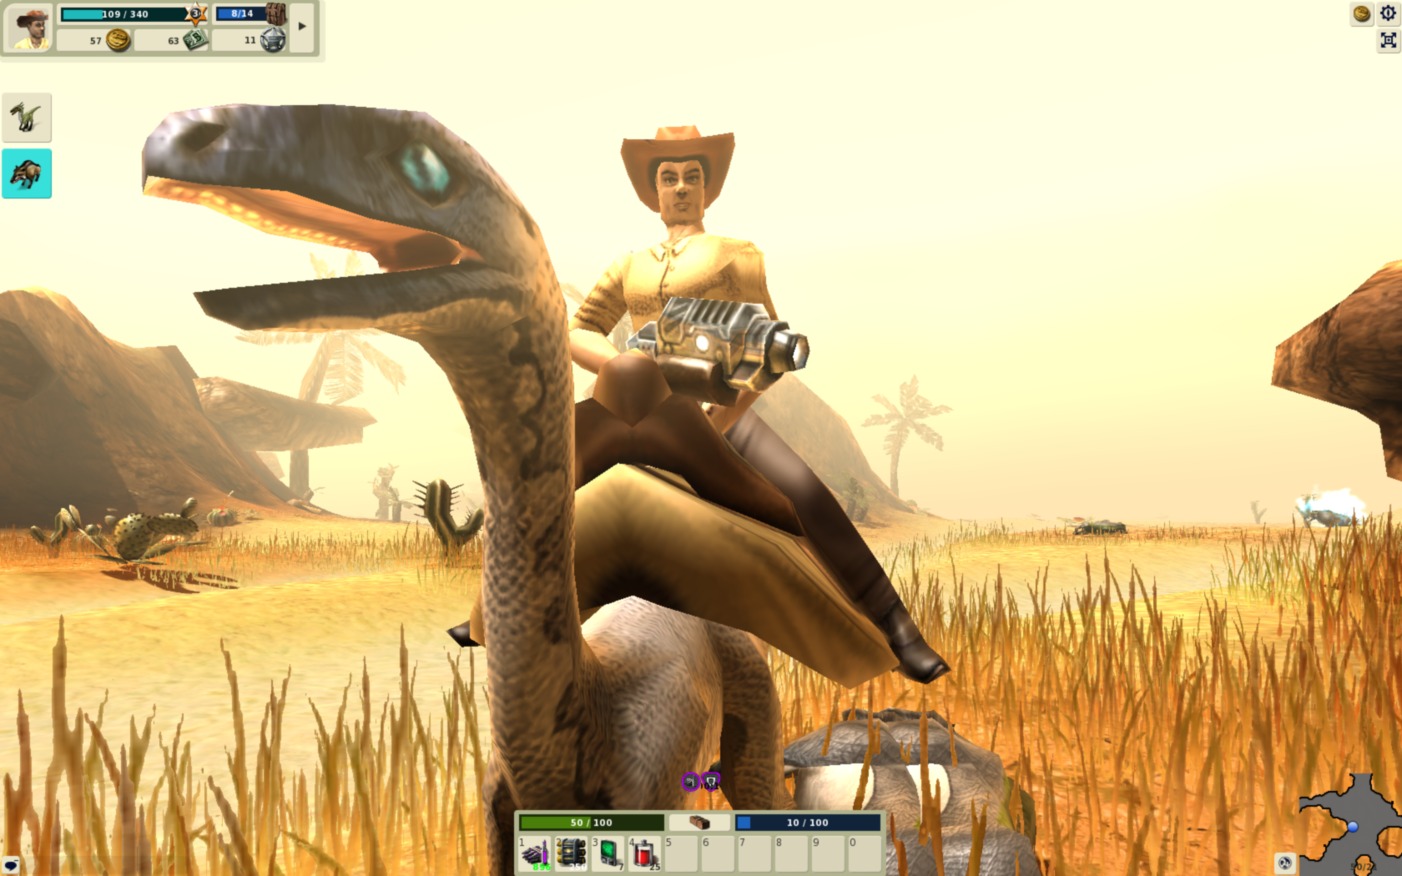 Dino Storm - The online game with cowboys, dinos & laser guns